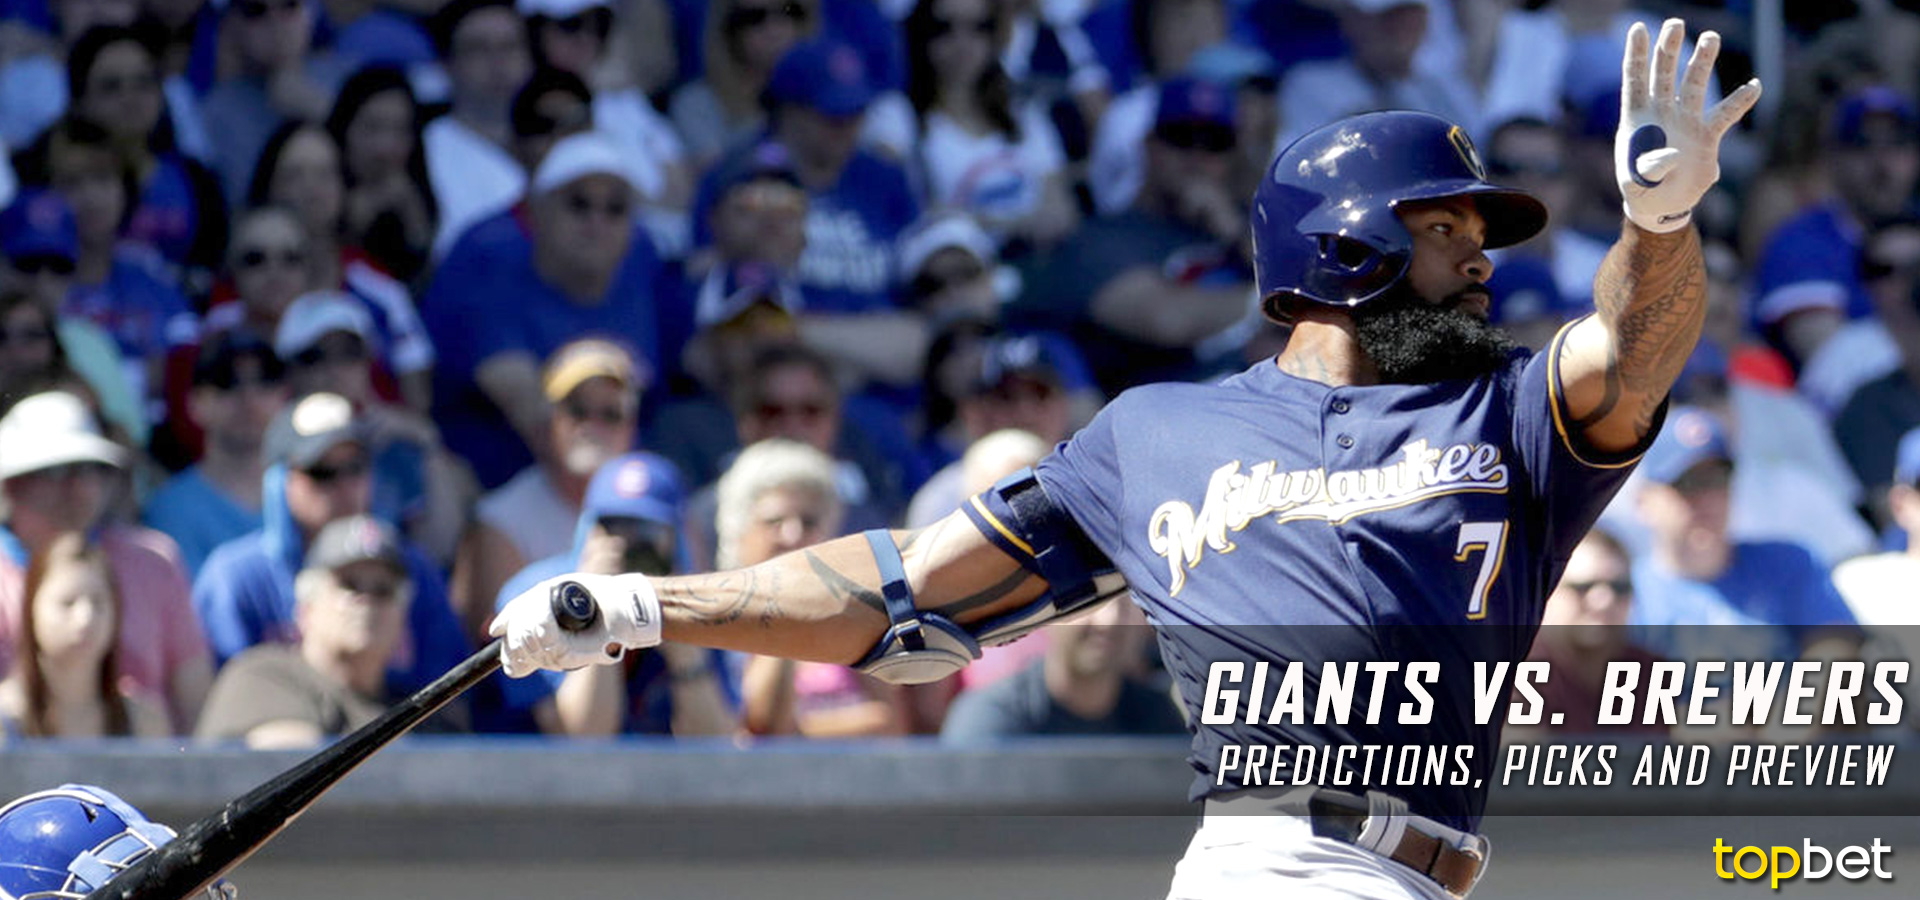 Giants vs Brewers Predictions and Preview June 5, 2017